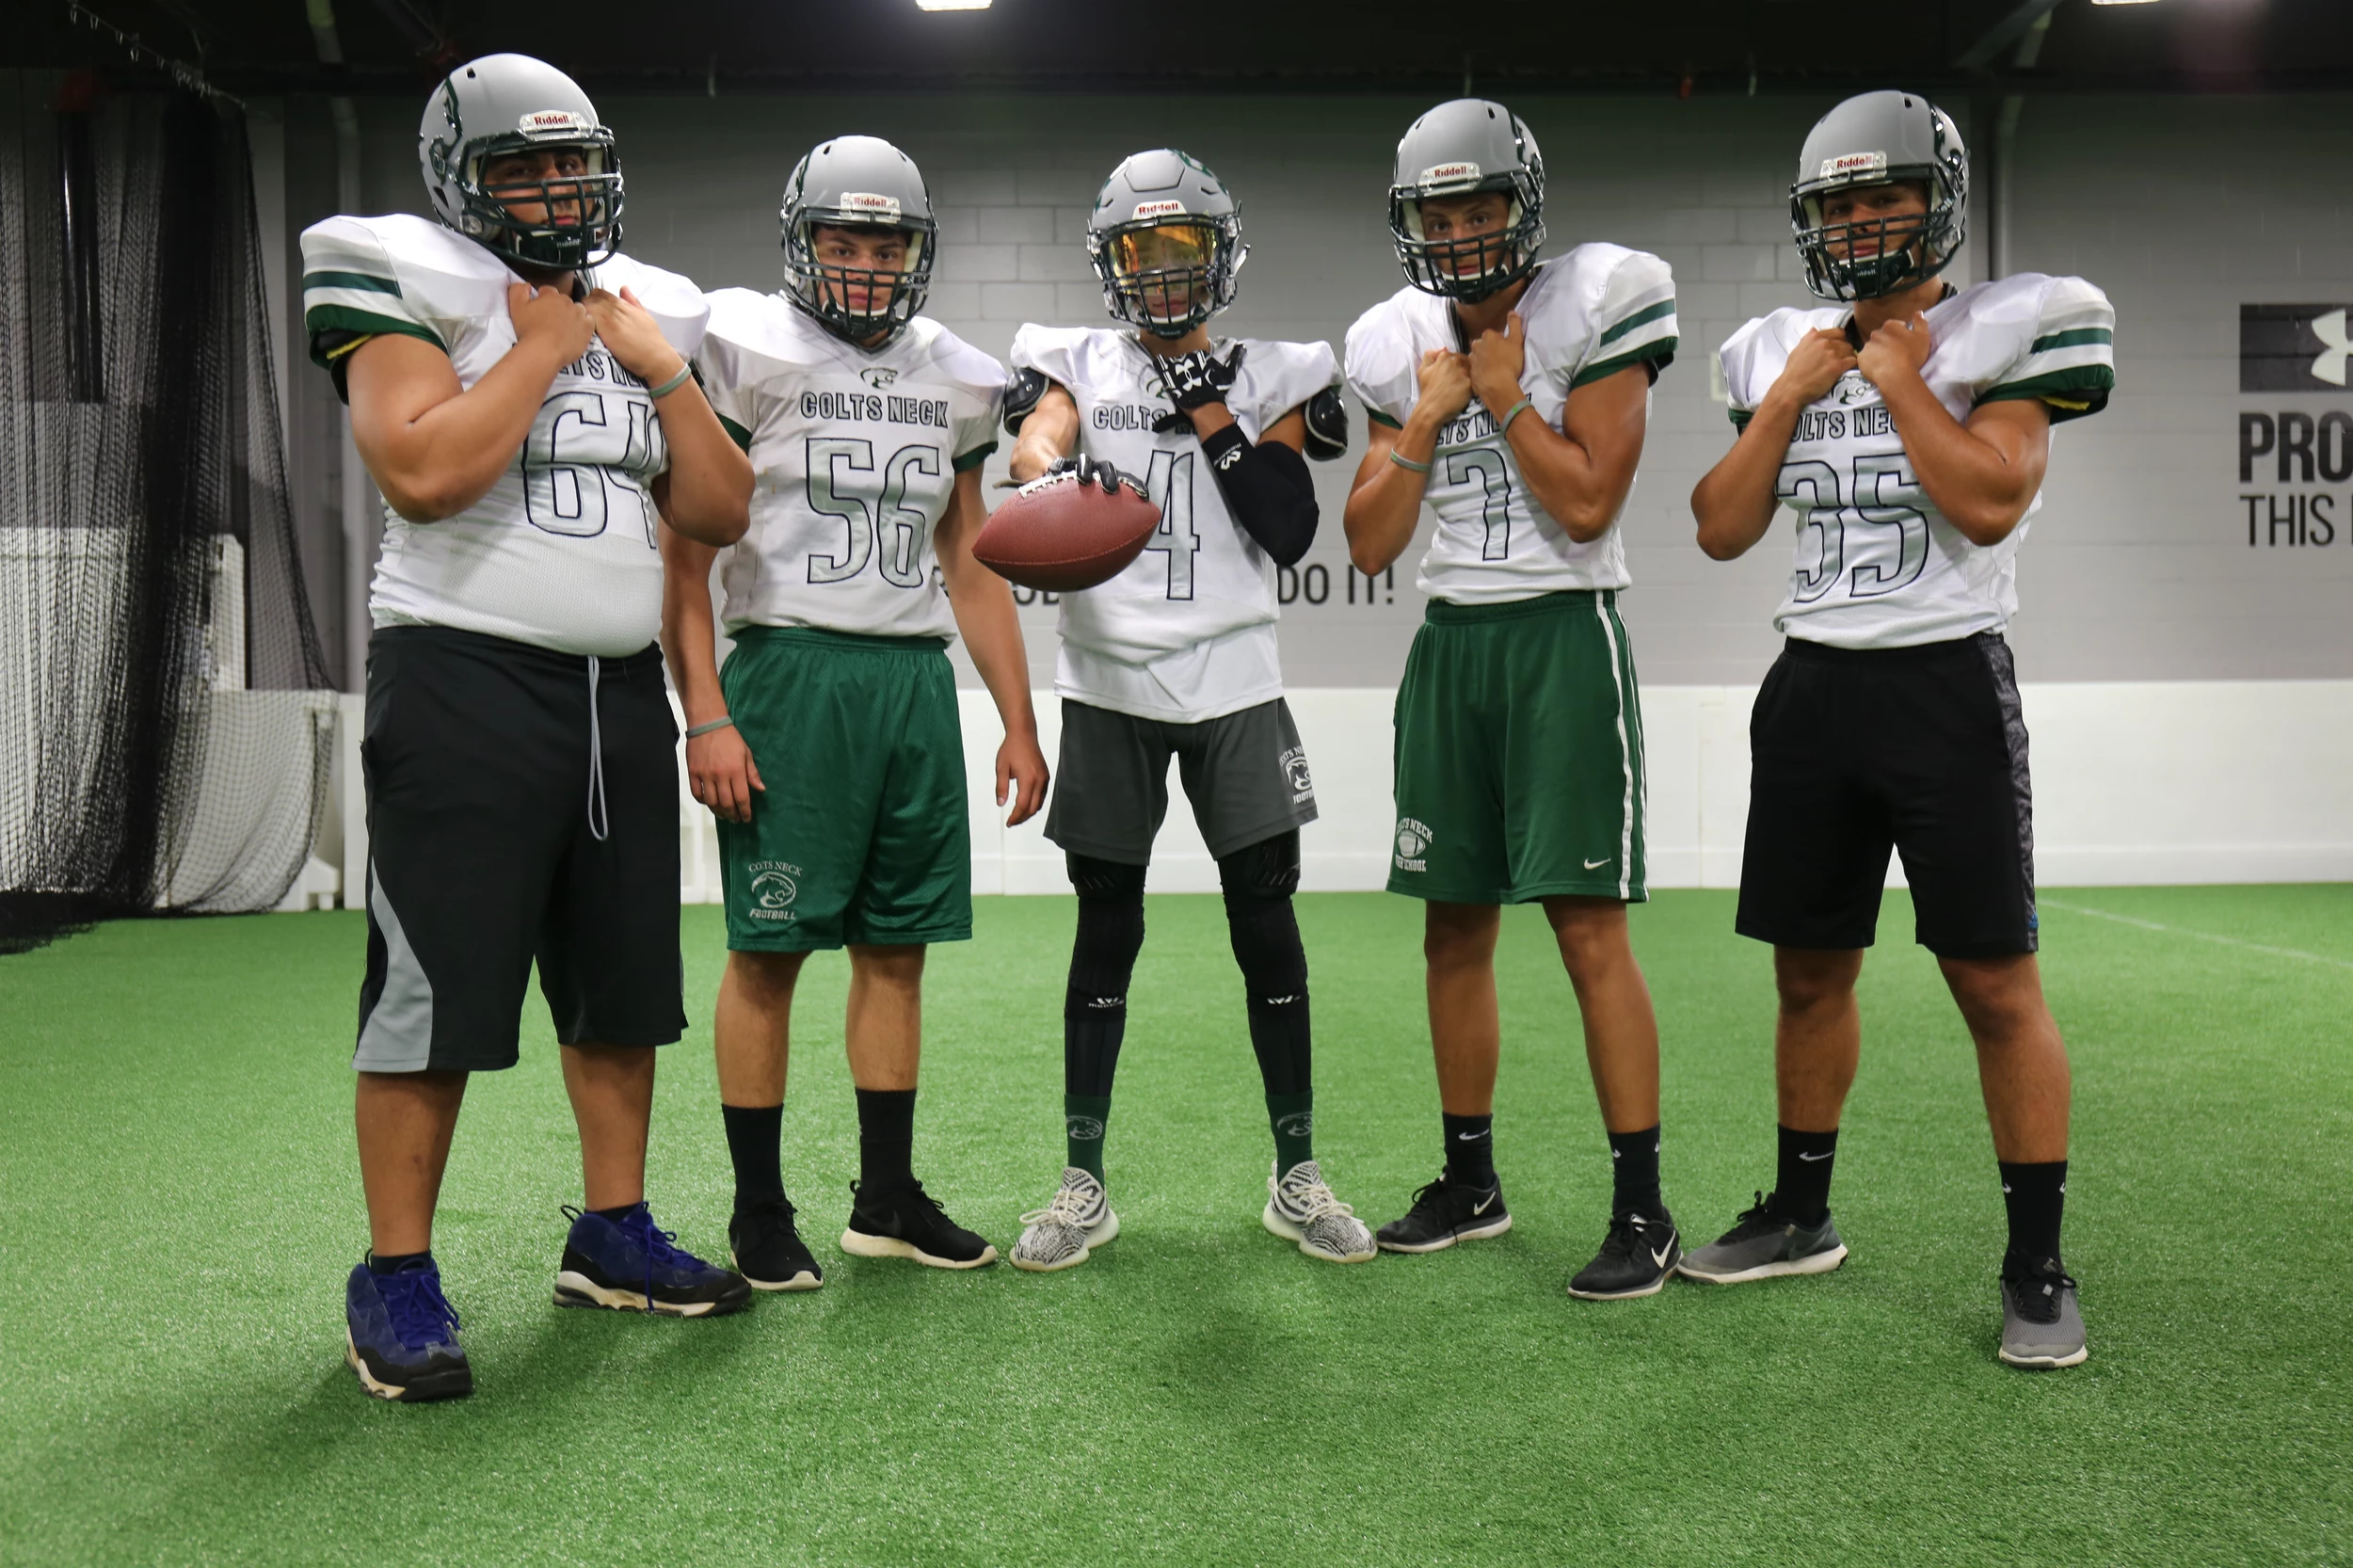 New Direction: 2018 Colts Neck Football Preview